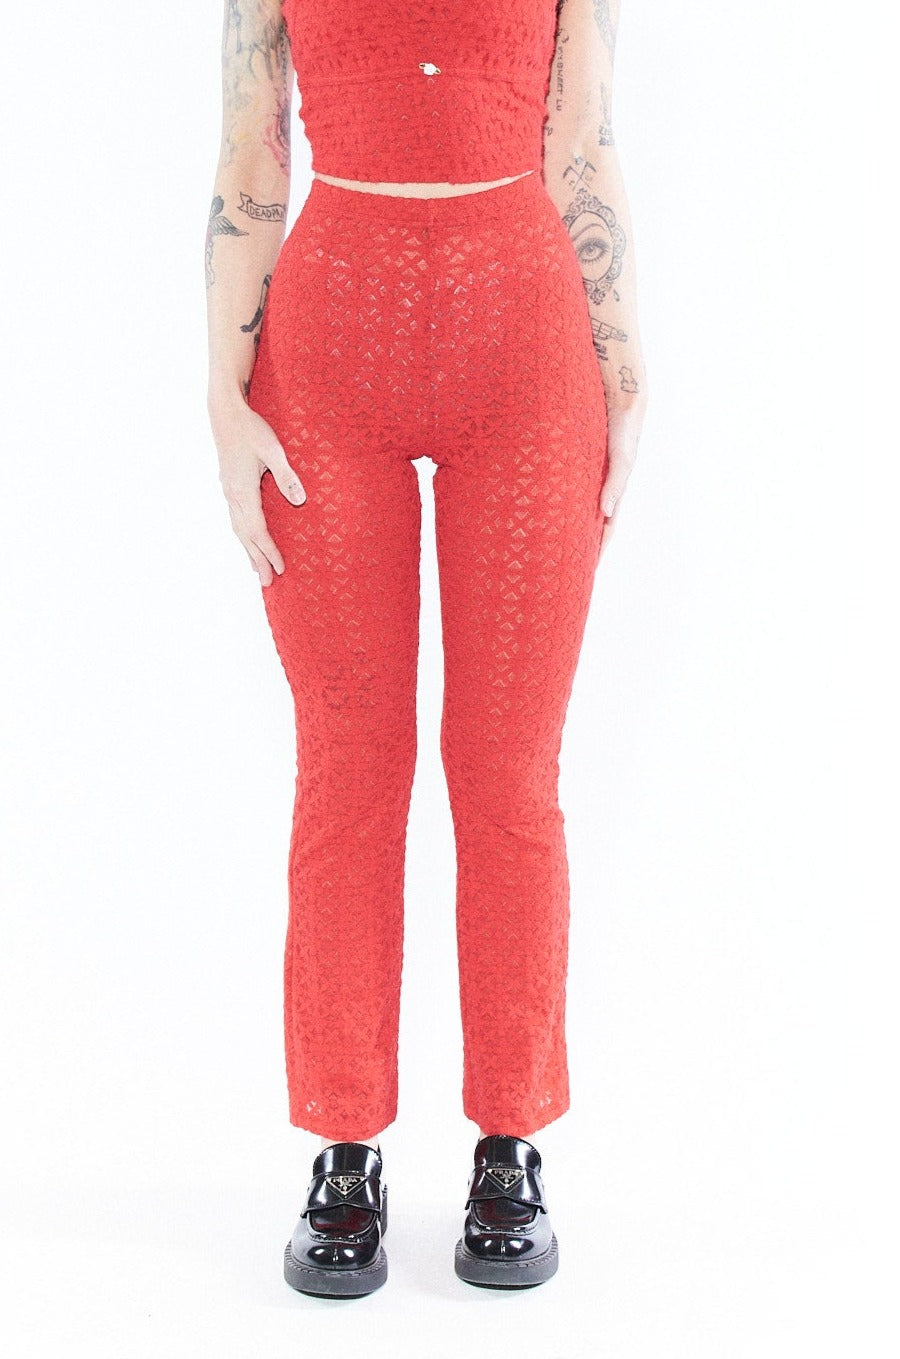 Red Lace Pants